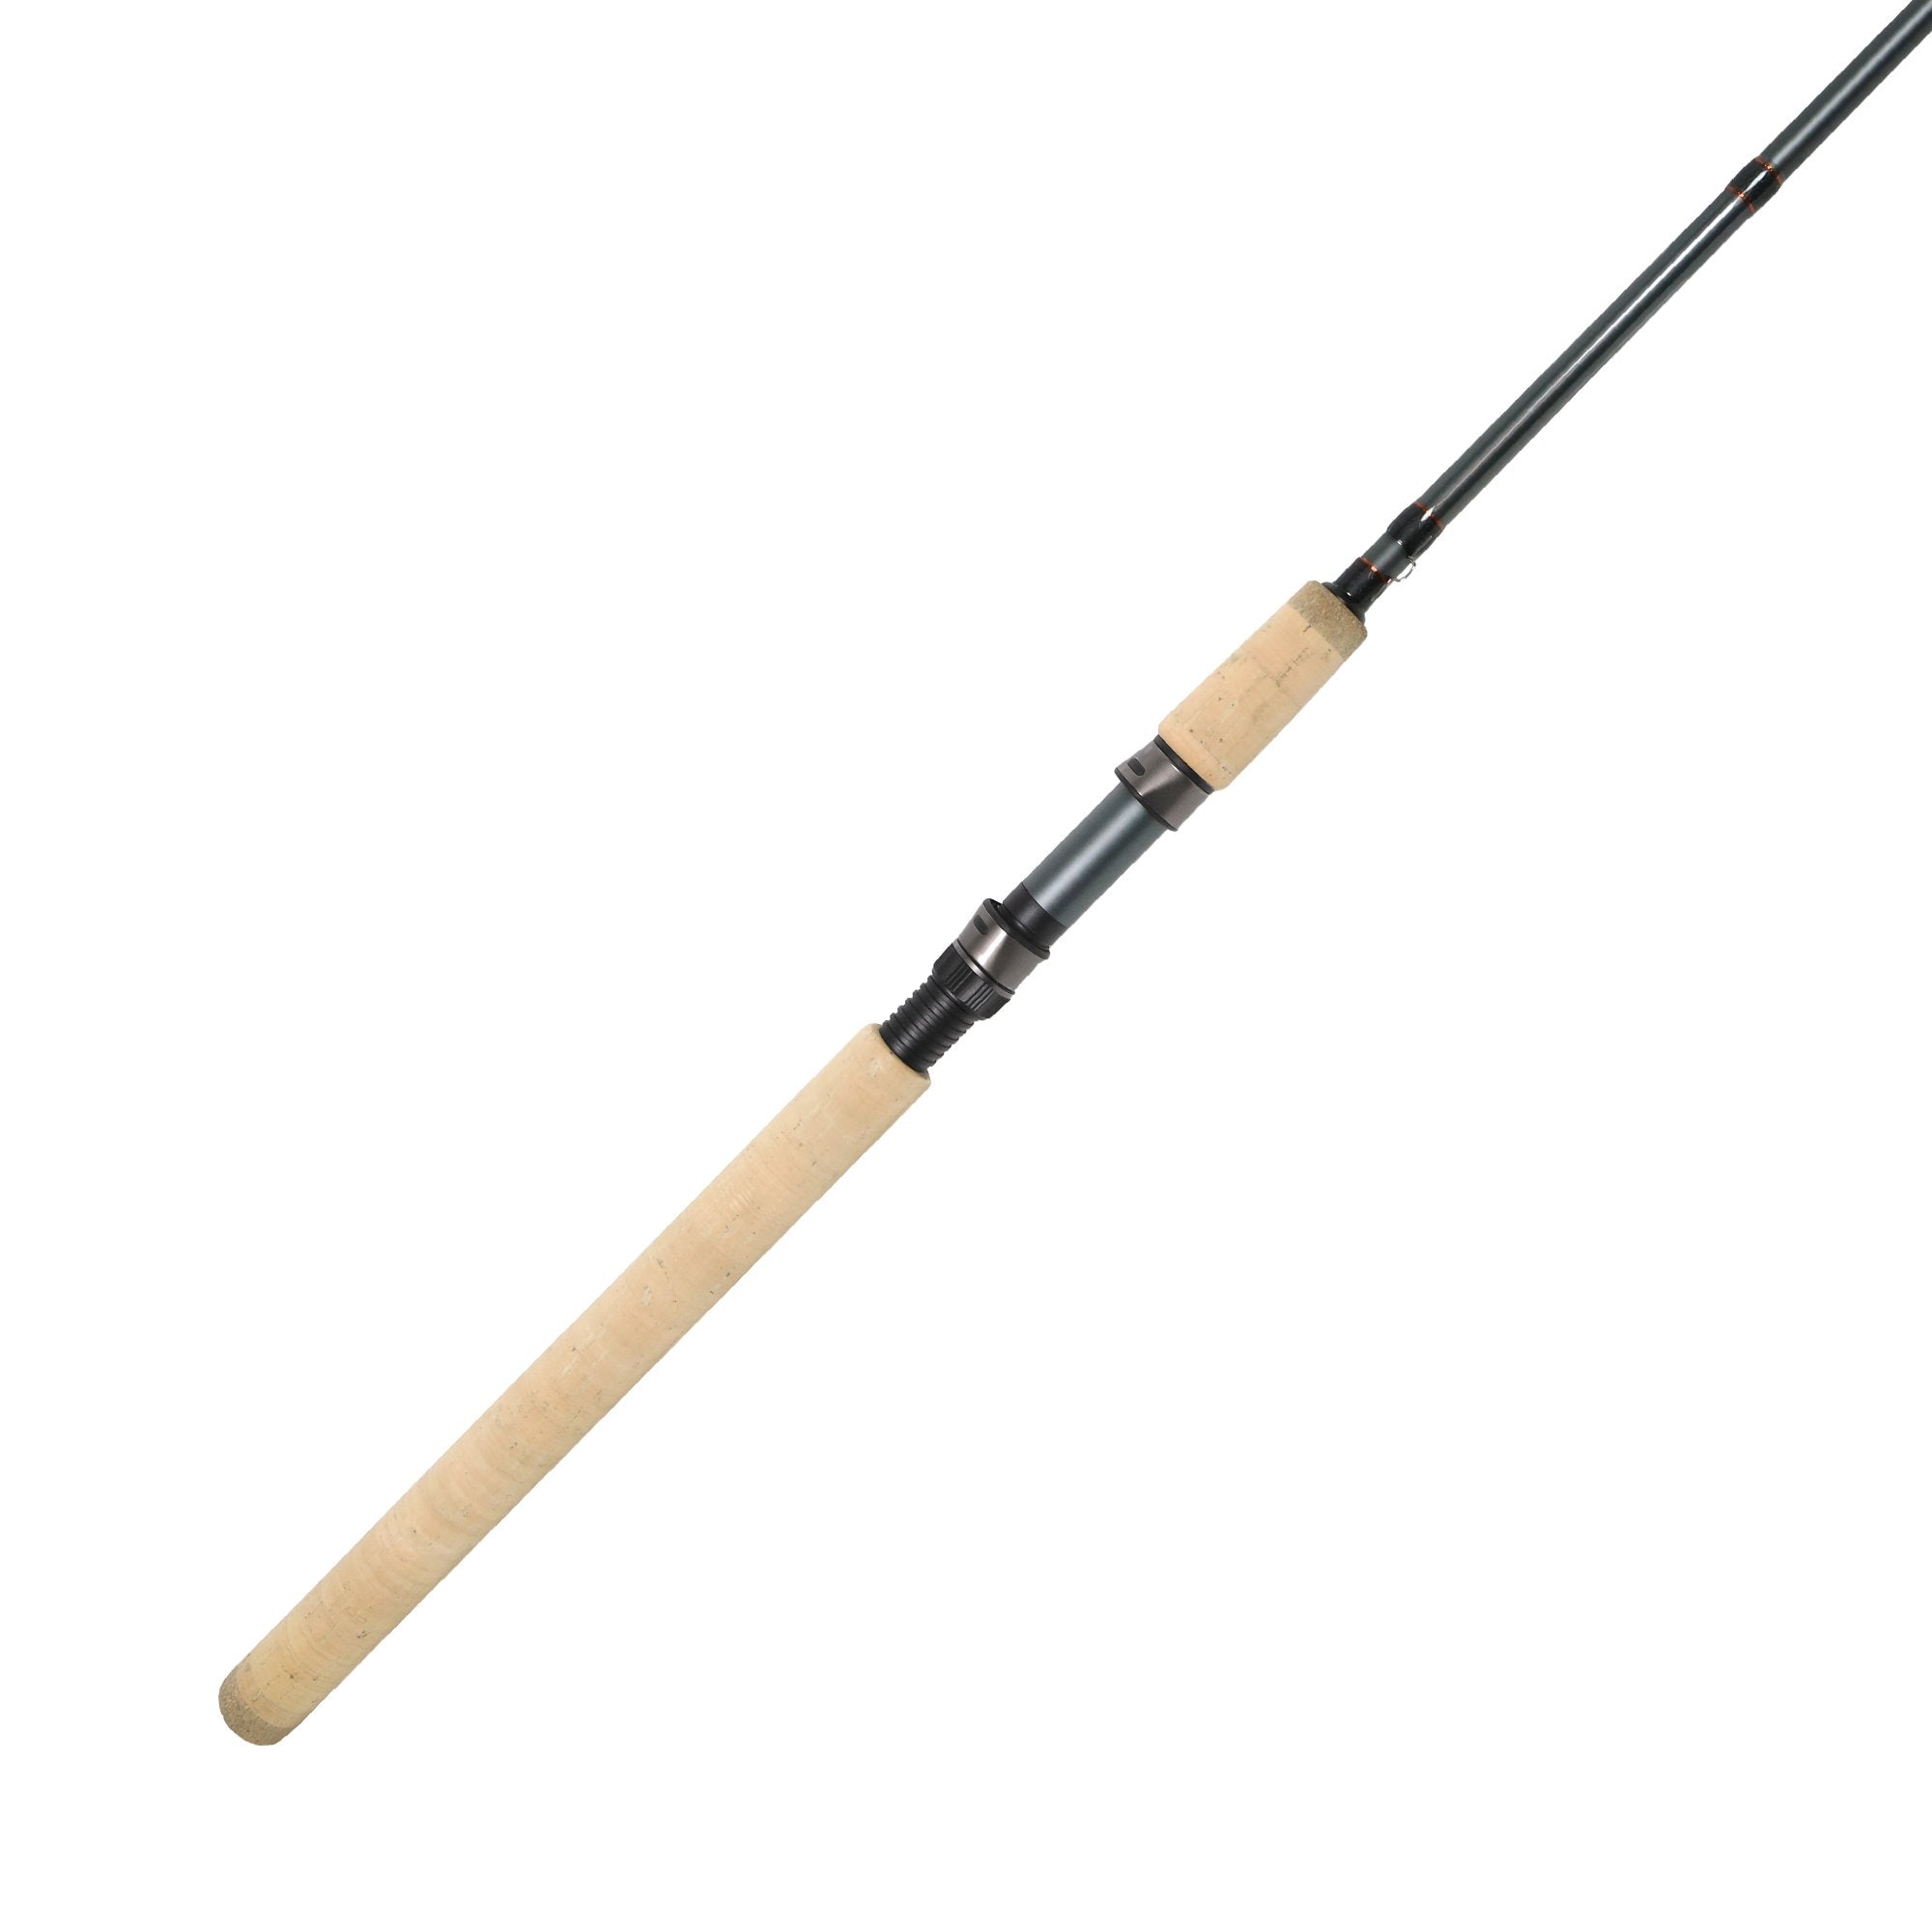 Okuma SST A Cork Grip Spinning Rod  Natural Sports – Natural Sports -  The Fishing Store